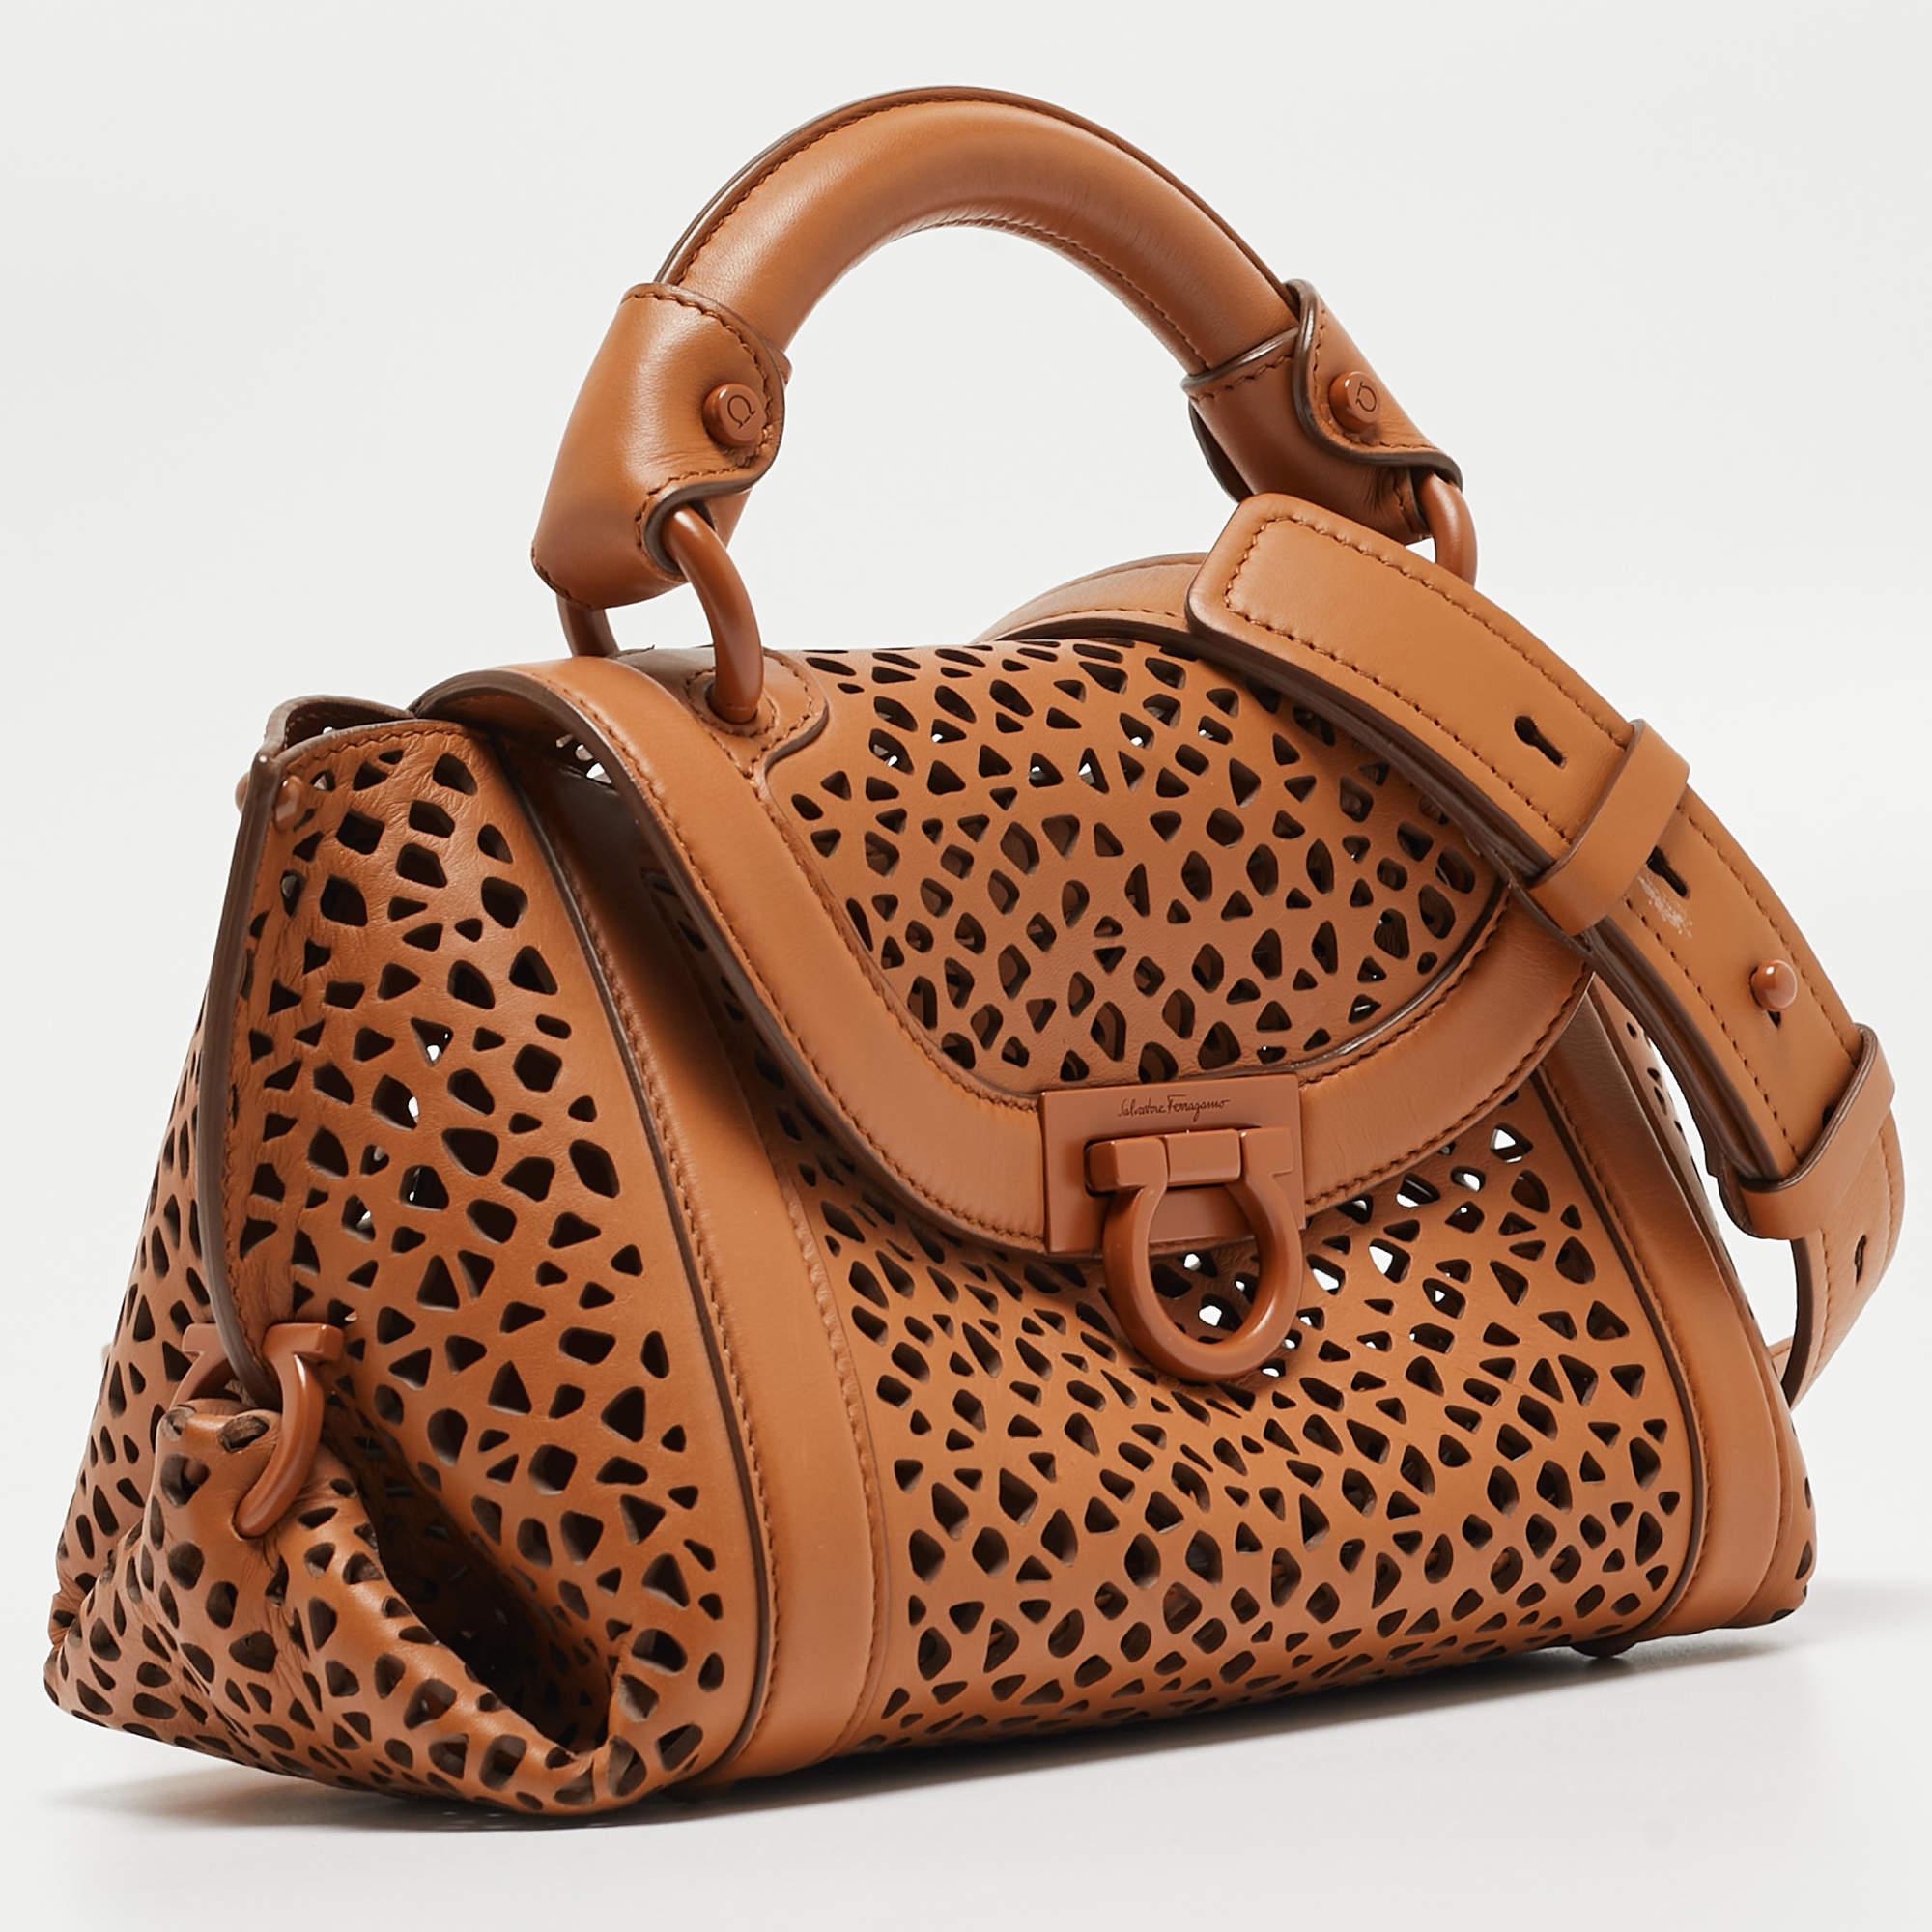 Carry this gorgeous Salvatore Ferragamo creation wherever you go and impress everyone around! Meticulously crafted from laser-cut leather, this bag has been styled with a top handle, a removable shoulder strap, and a leather interior to hold all